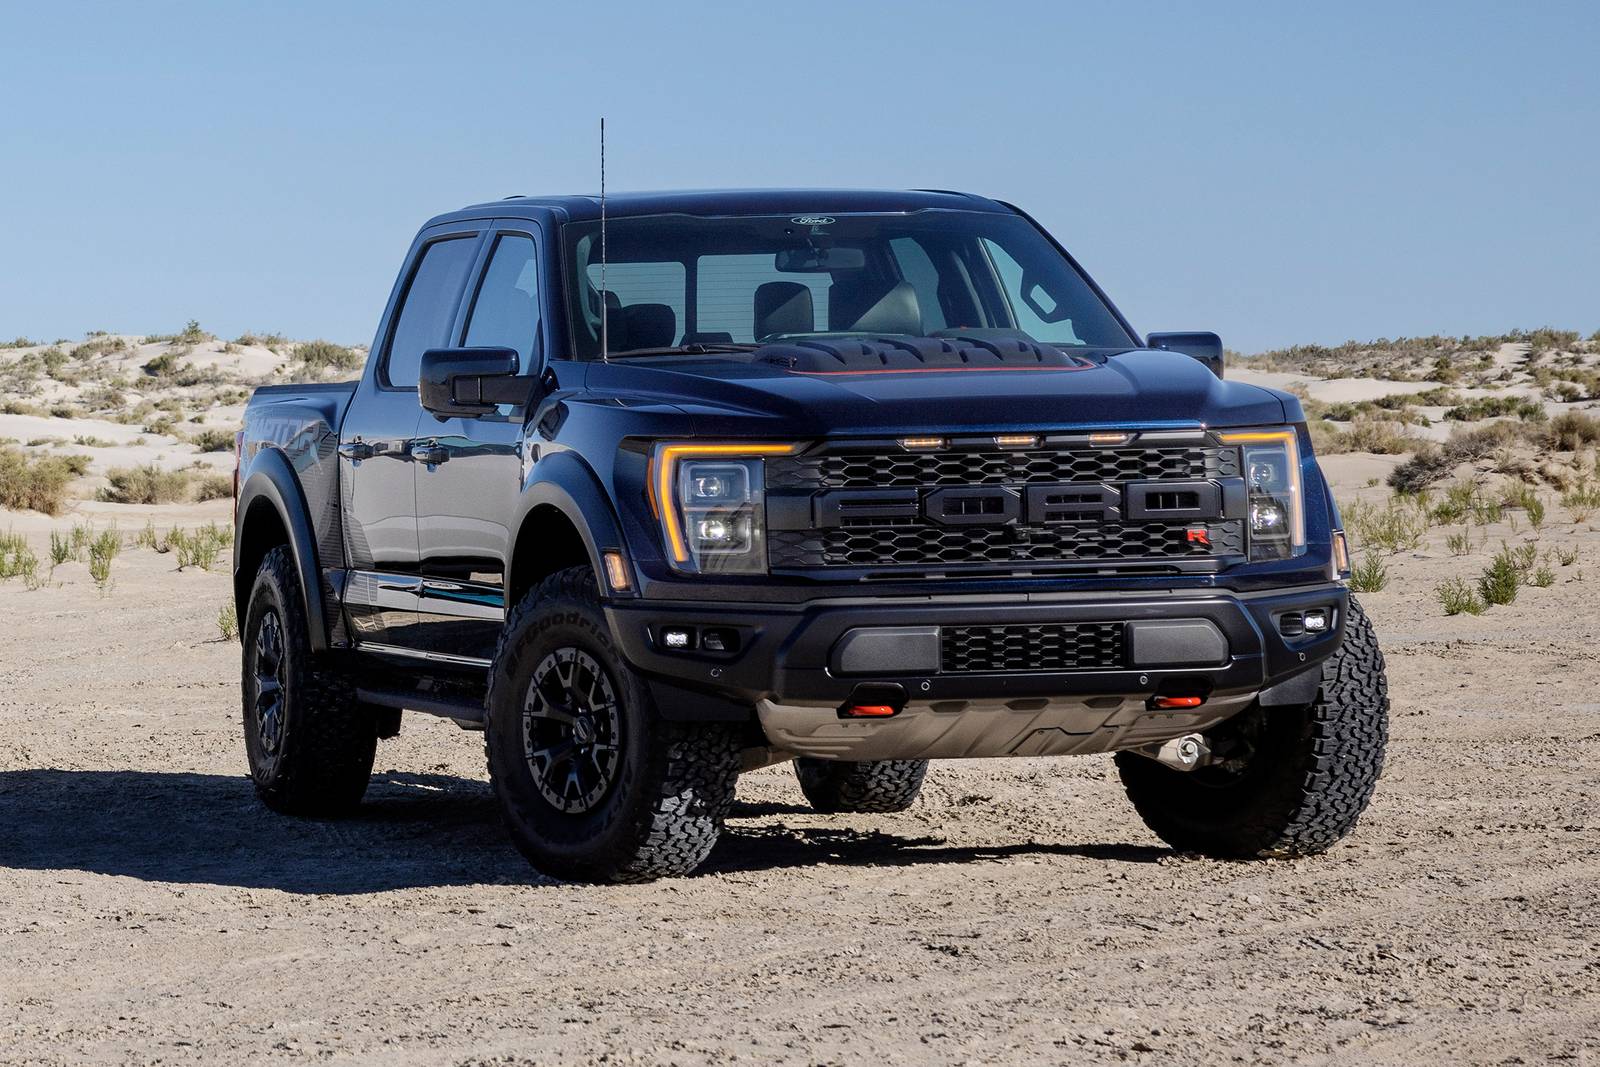 Revving Up: Ranking the Best and Worst Years for the Ford Raptor